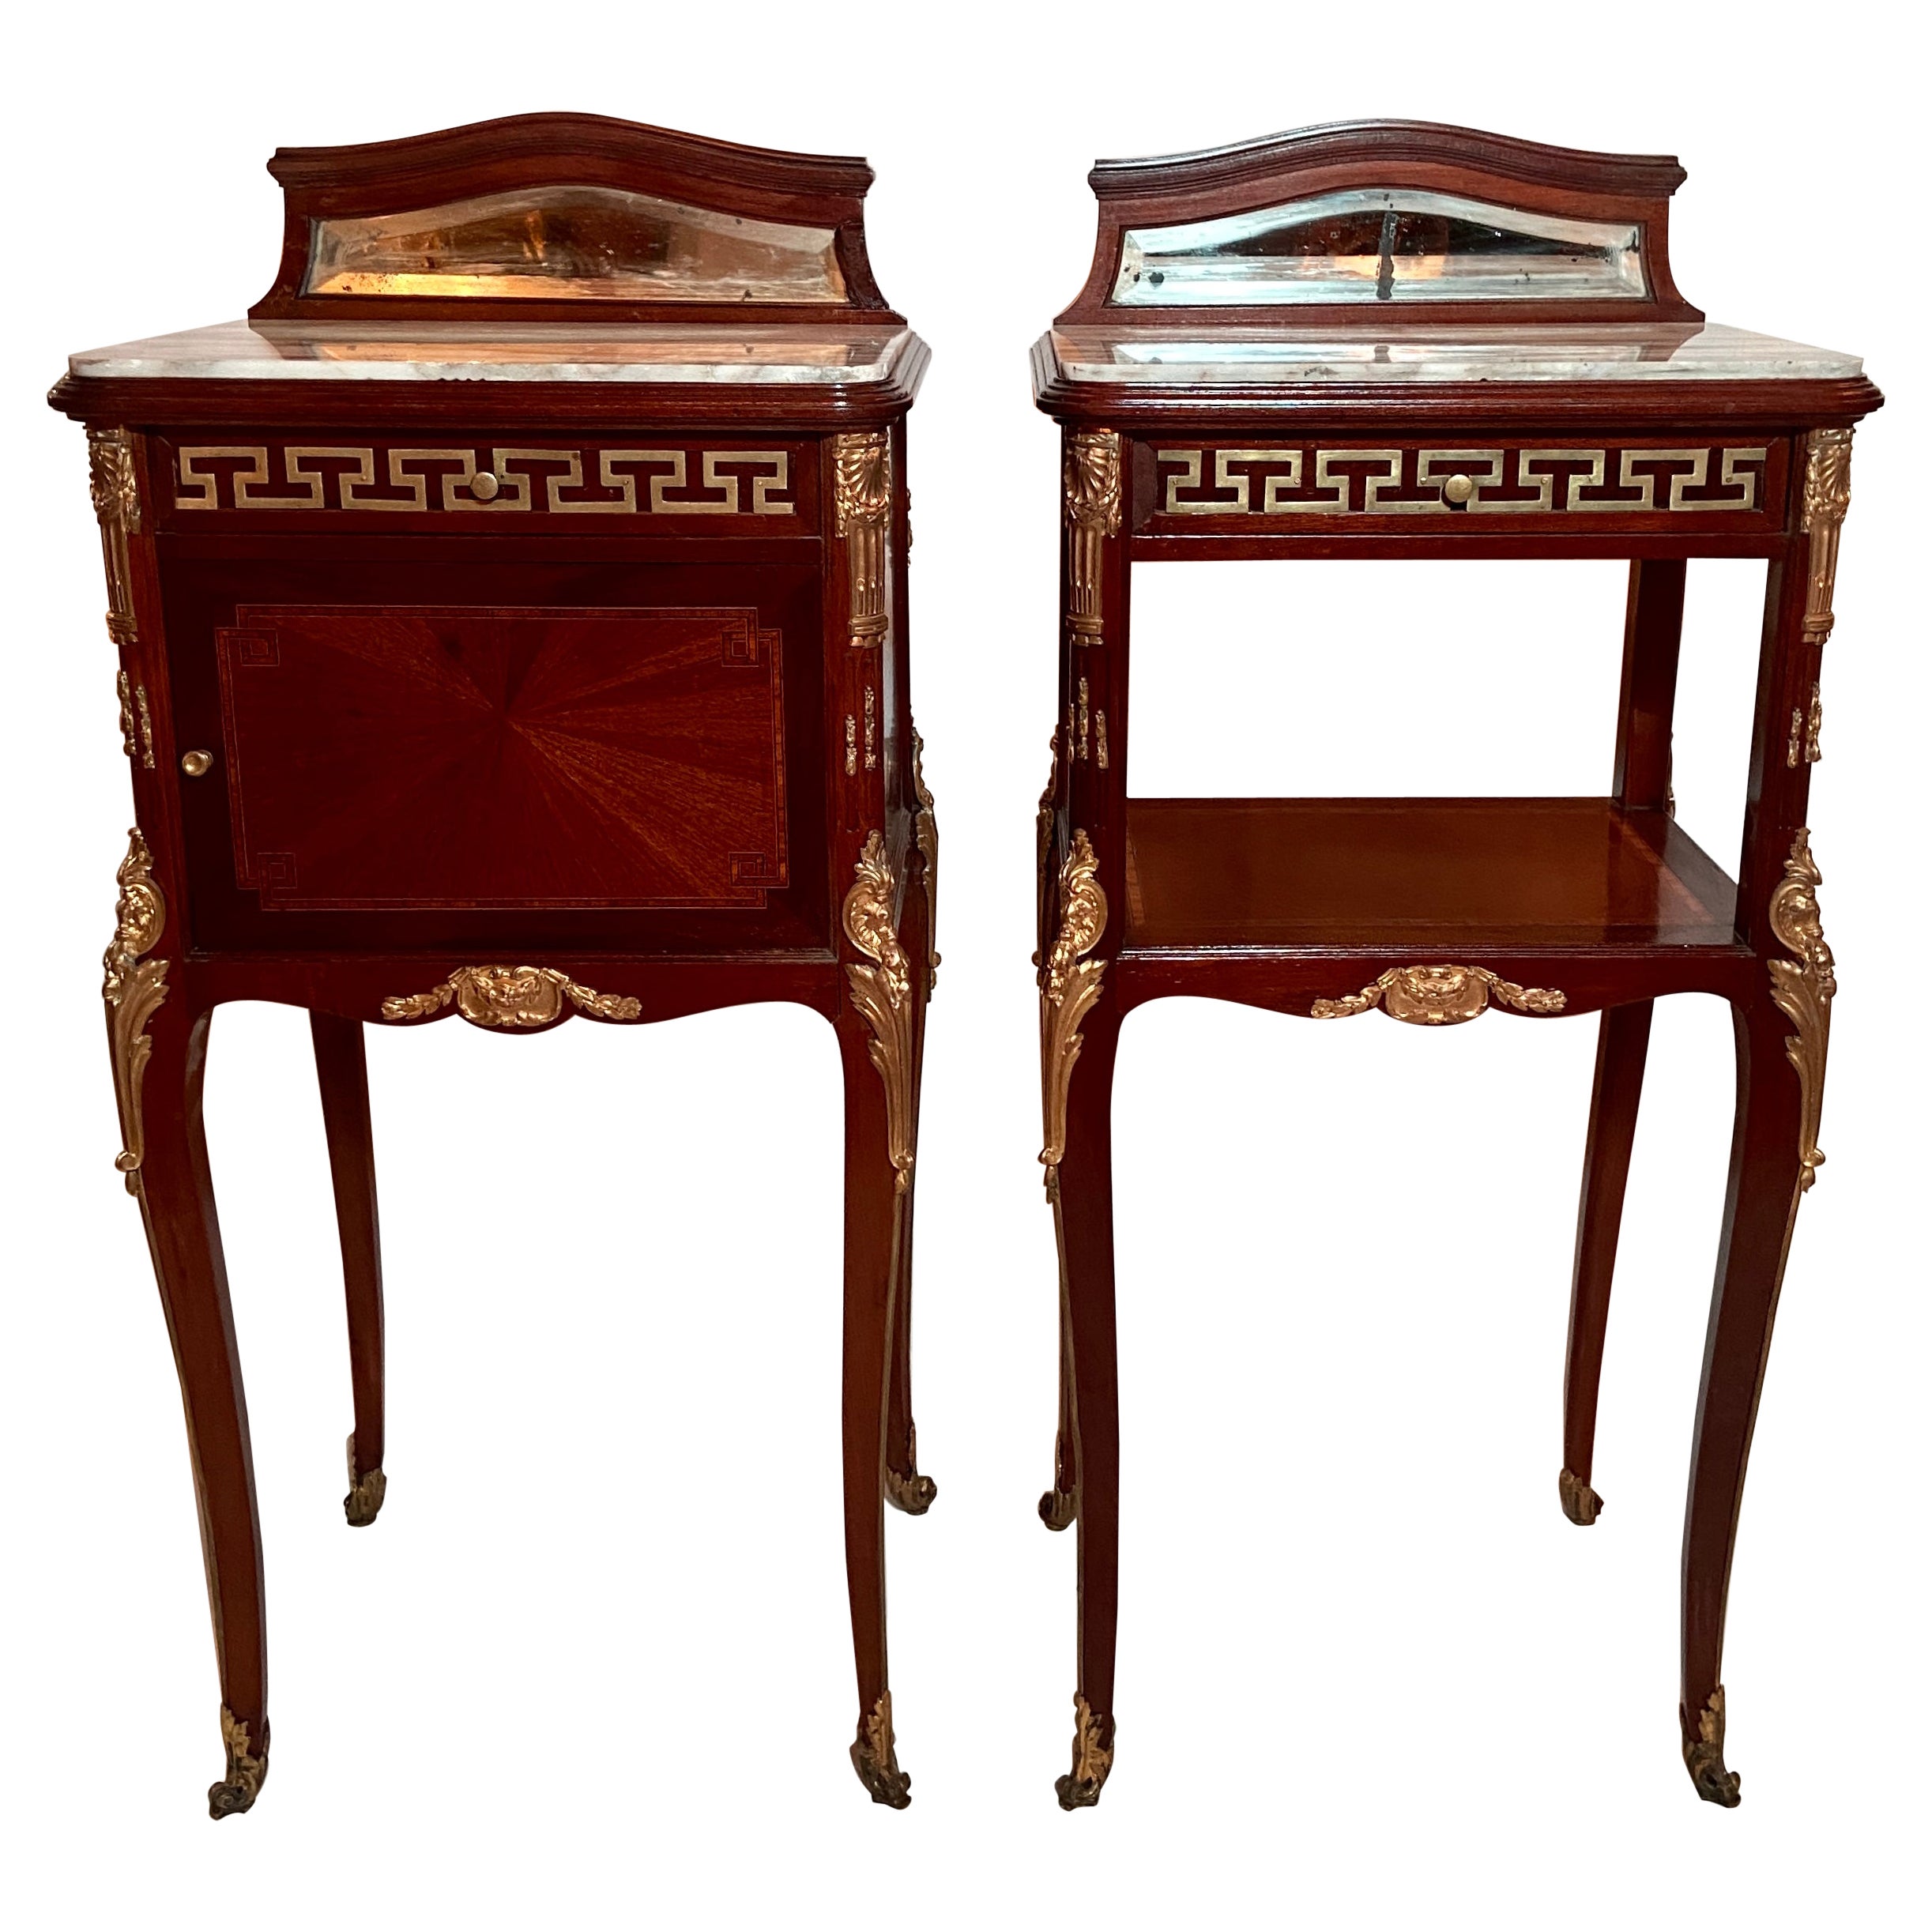 Pair Antique French Bronze D' Ore & Marble Top Mahogany Nightstand Tables C 1890